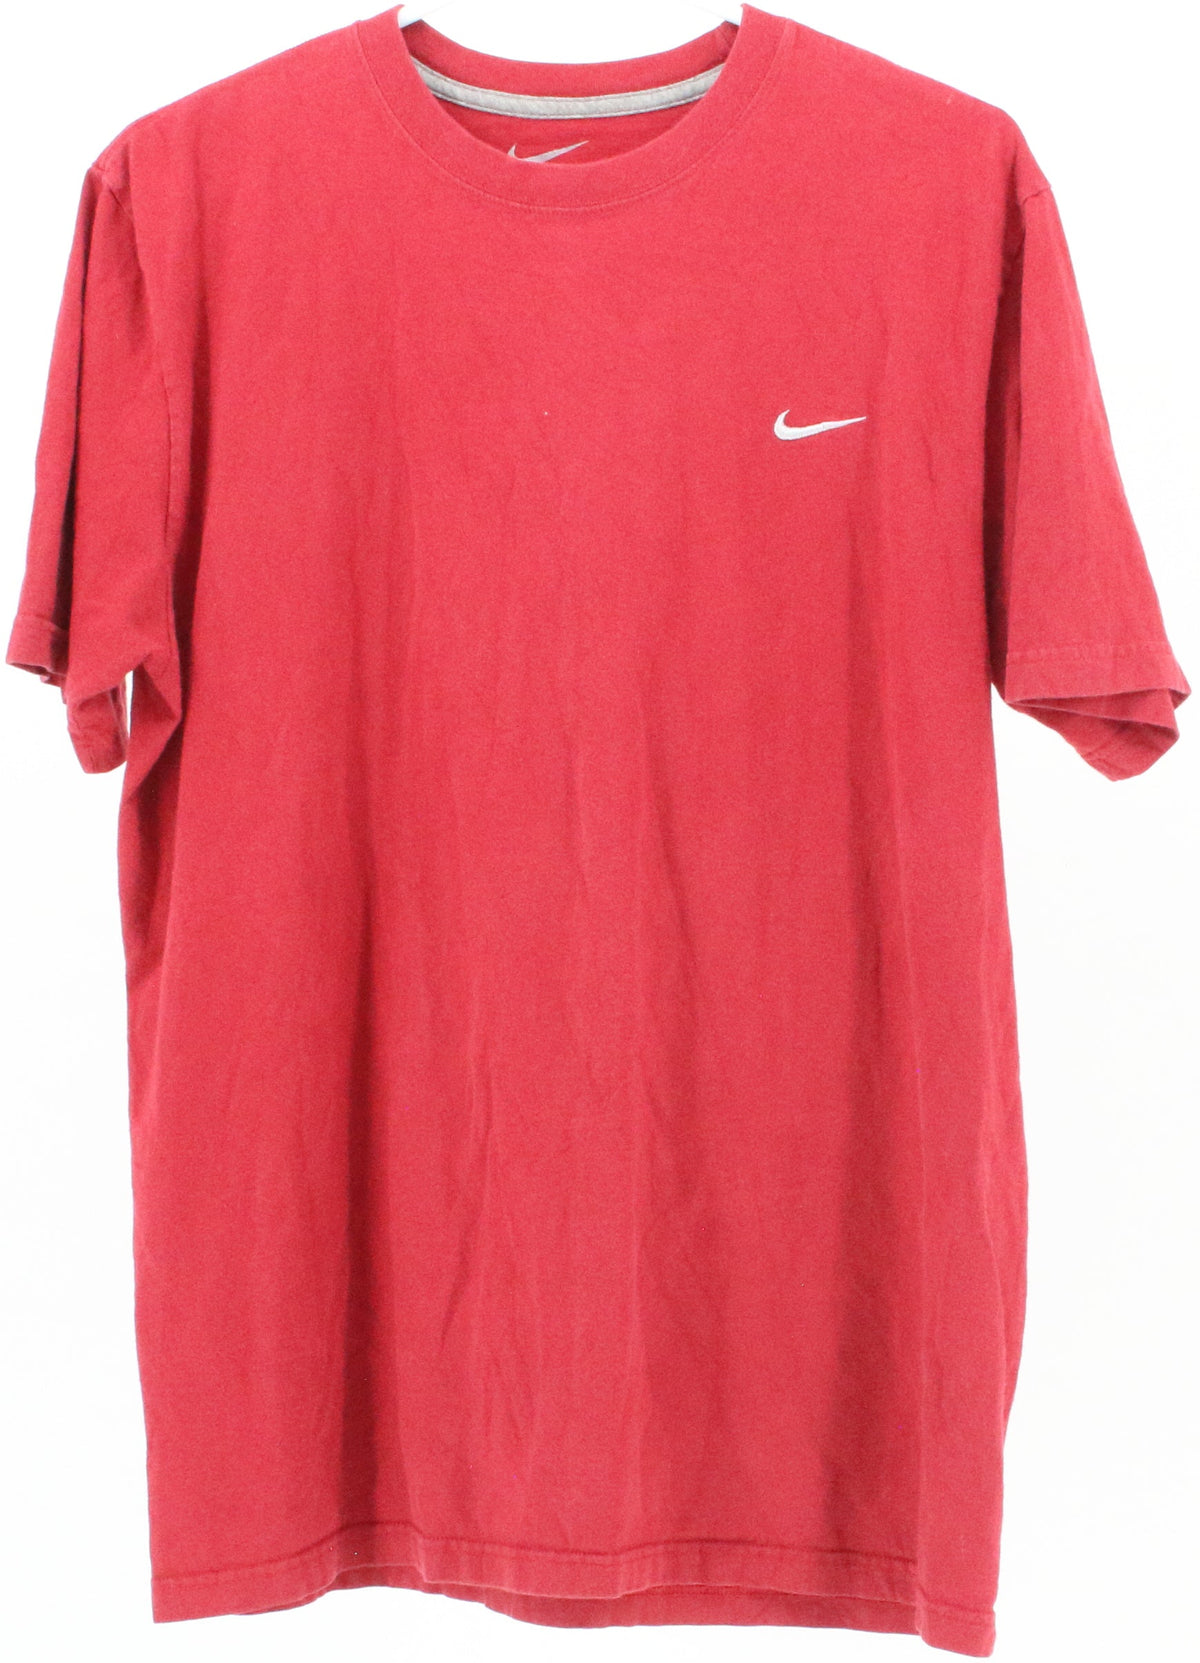 Nike Red Standard Fit T-Shirt